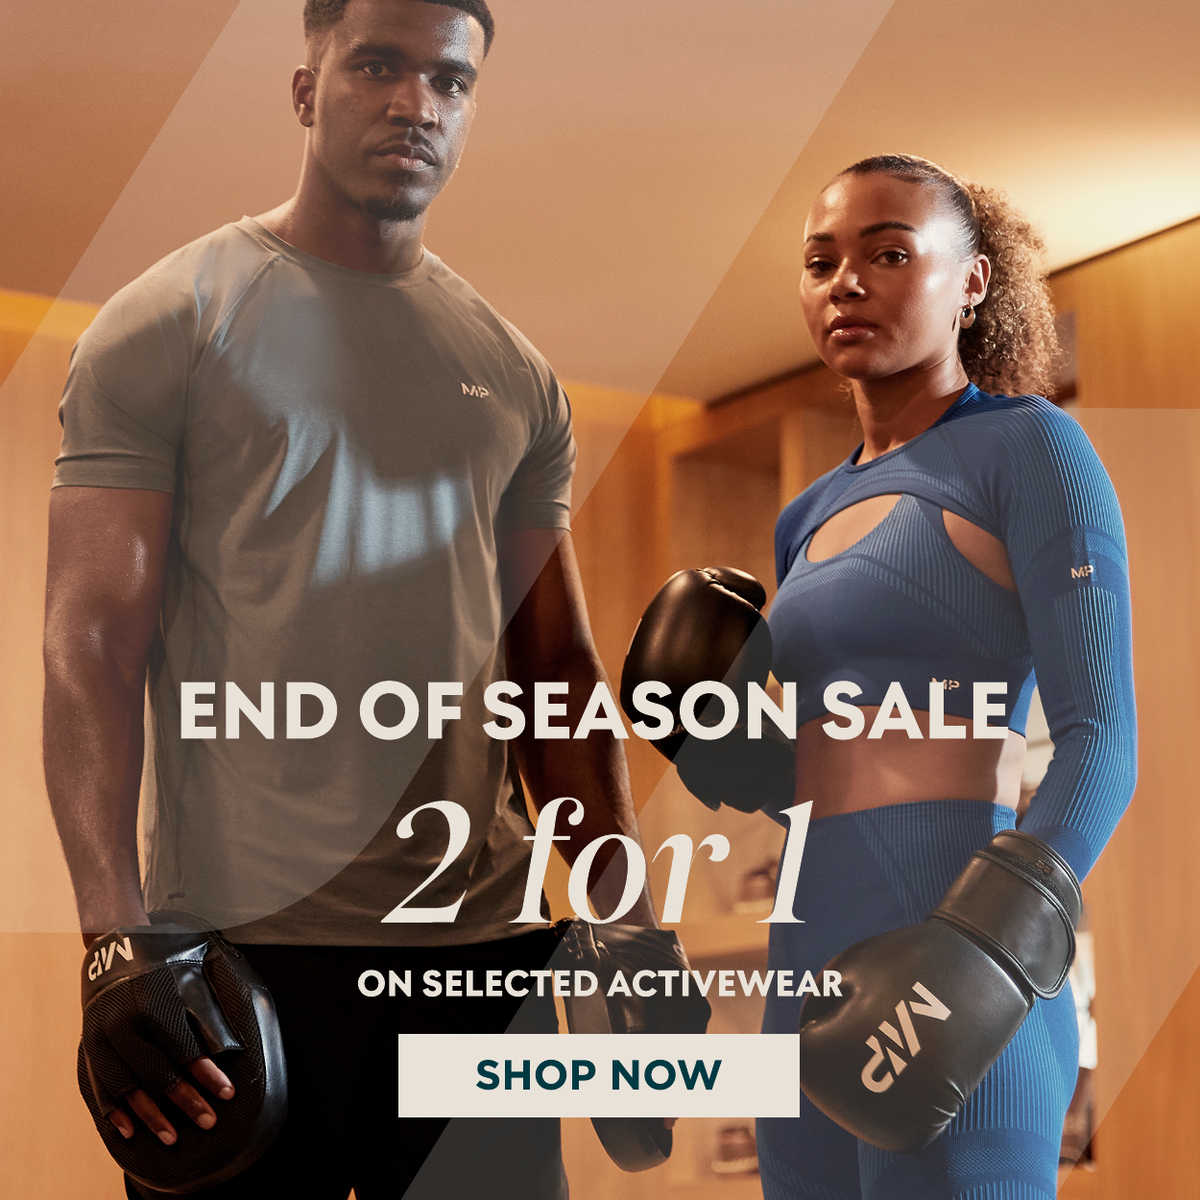 End of season sale, 2 for 1 on selected activewear